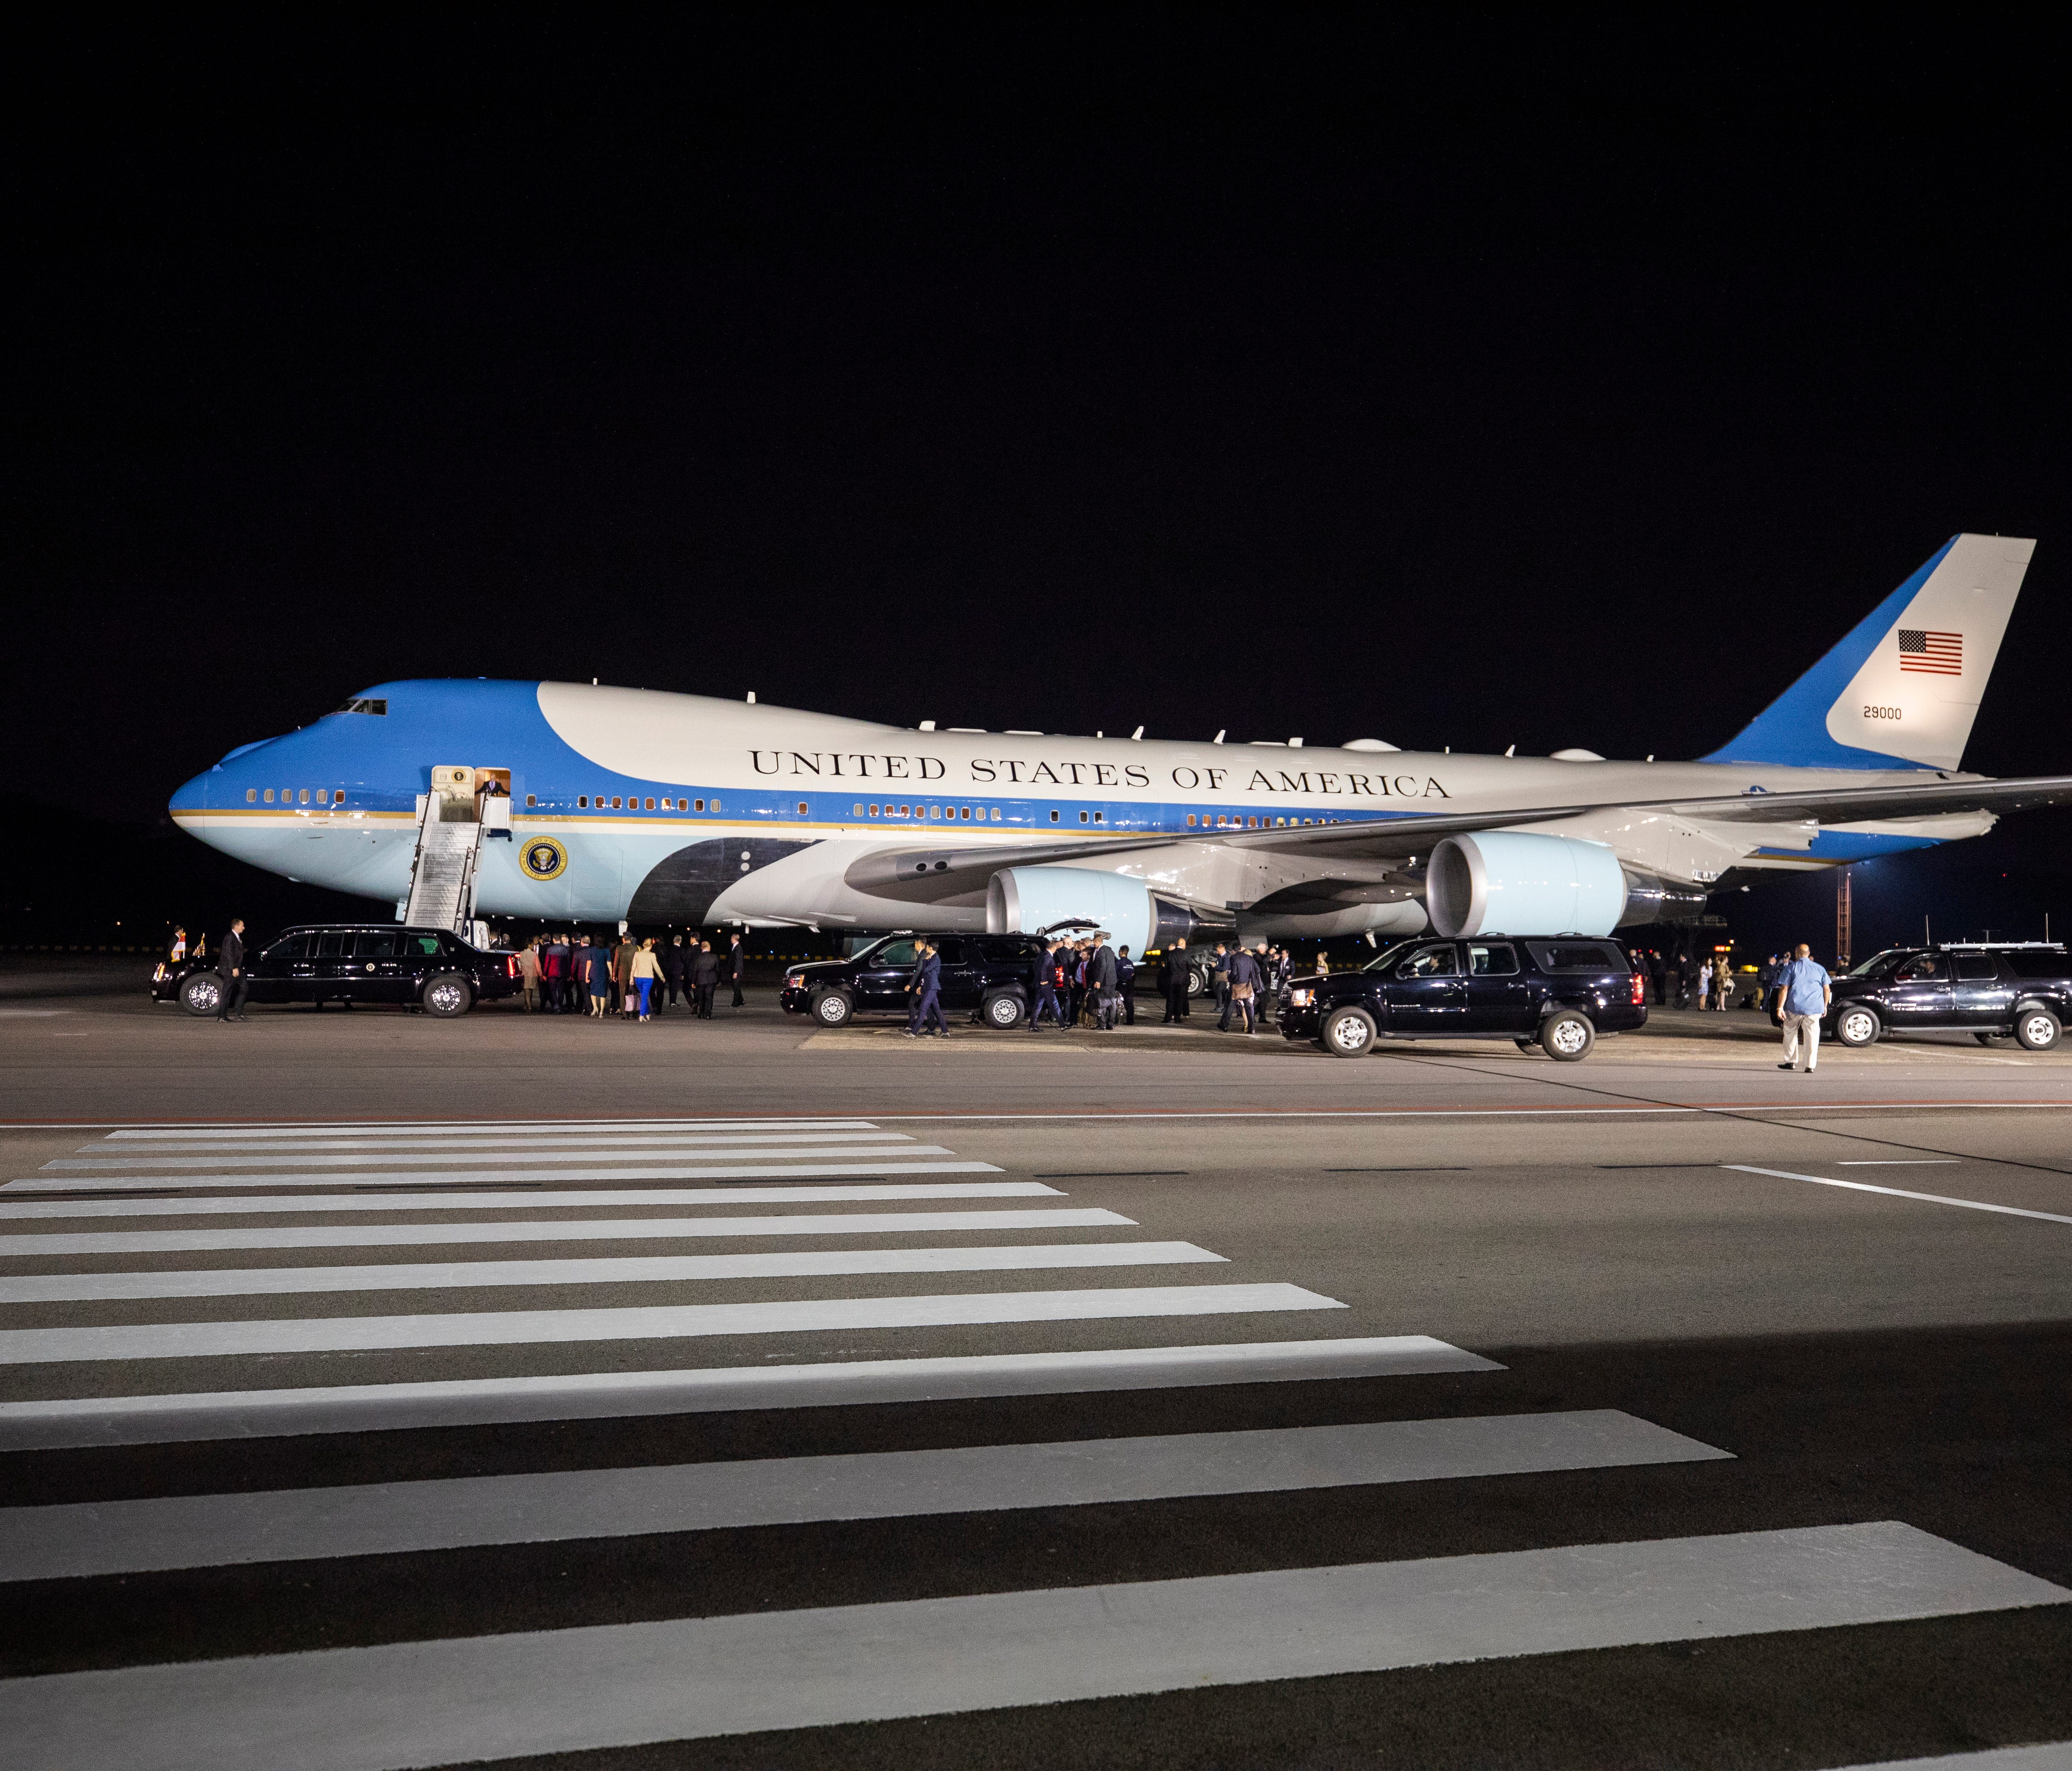 Air Force One has several special modifications, but details about flight operations are not shared publicly.